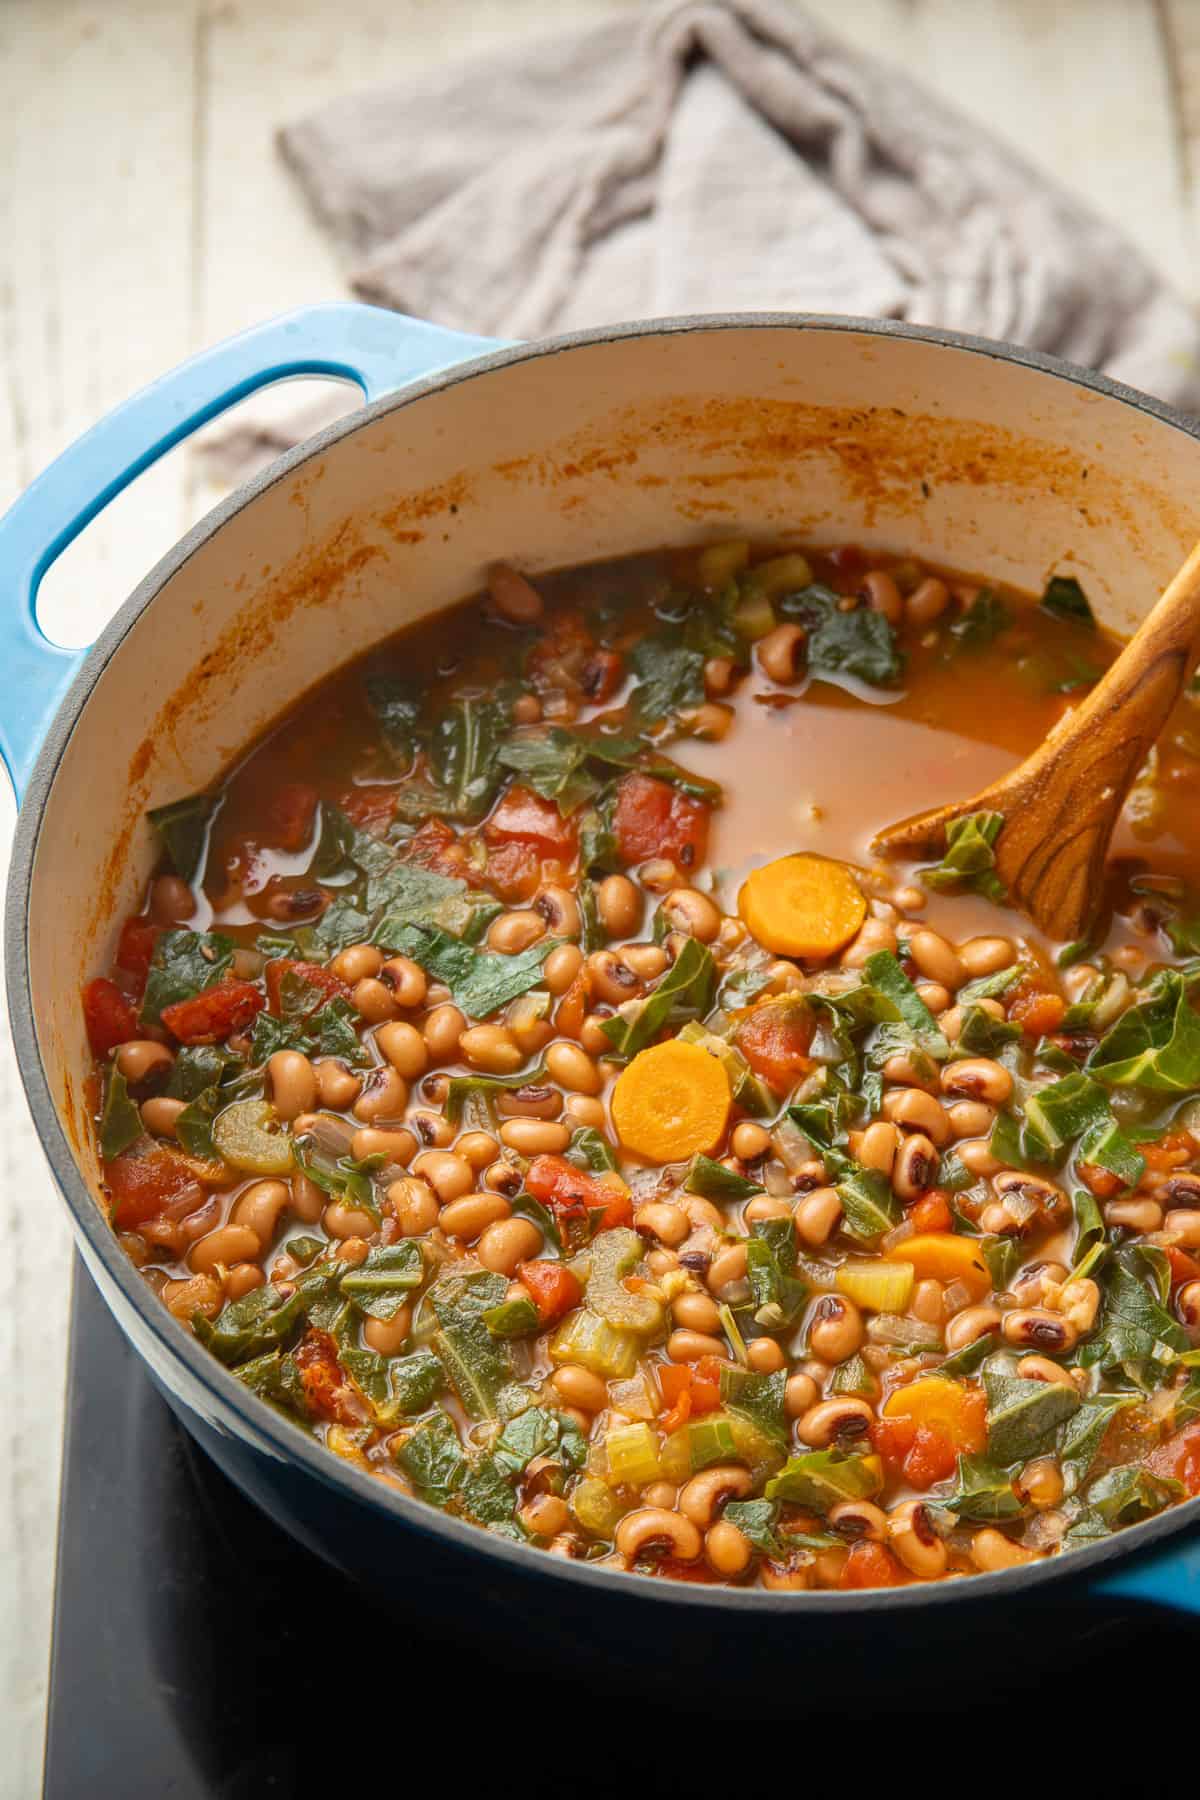 Black-Eyed Pea Soup cooking in a pot.